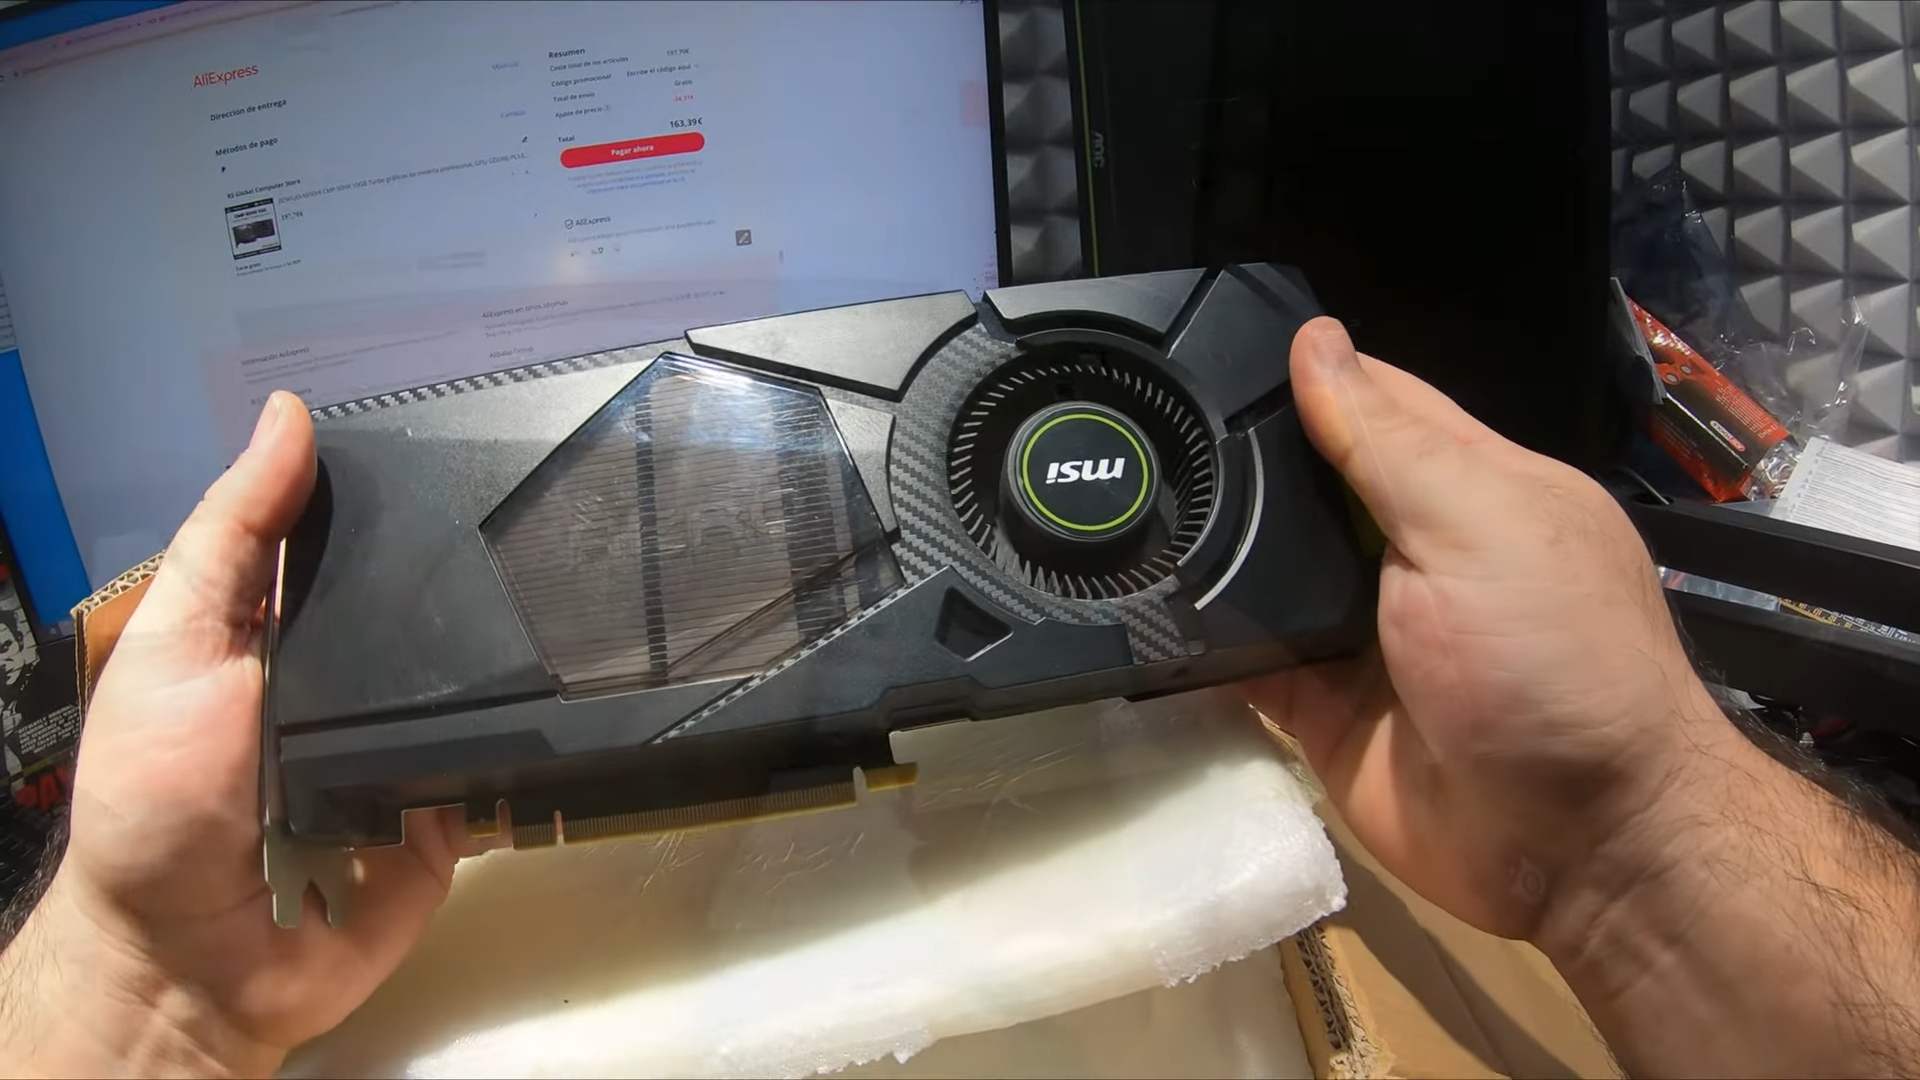 NVIDIA CMP GPUs: Not suitable for gaming – YouTube user explains why